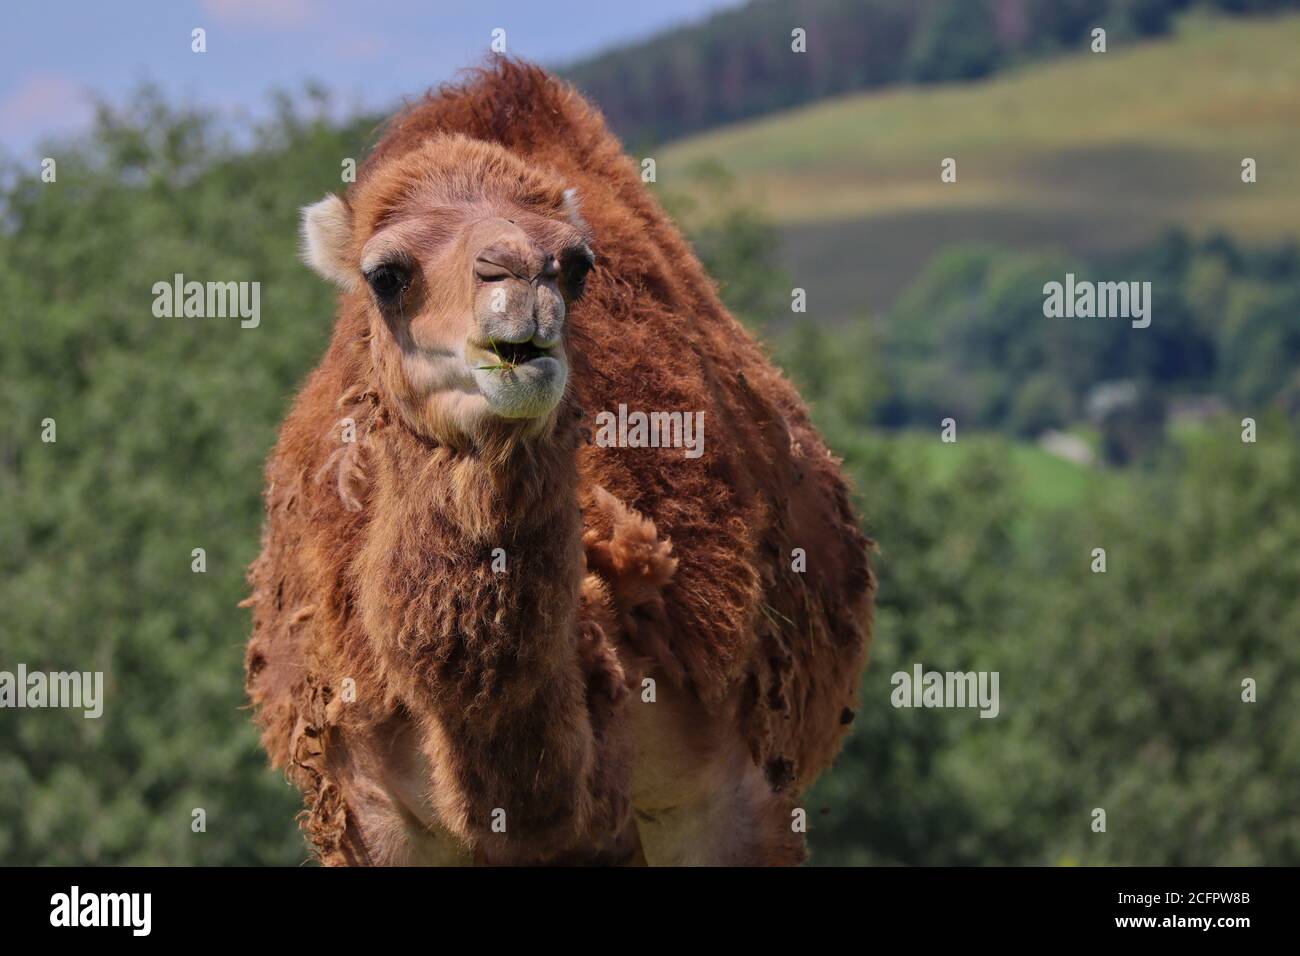 Closeup of Dromedary Camel also called Somali or Arabian Camel in Czech Farm Park. Camelus Dromedarius is a Large Even-Toed Ungulate with One Hump. Stock Photo